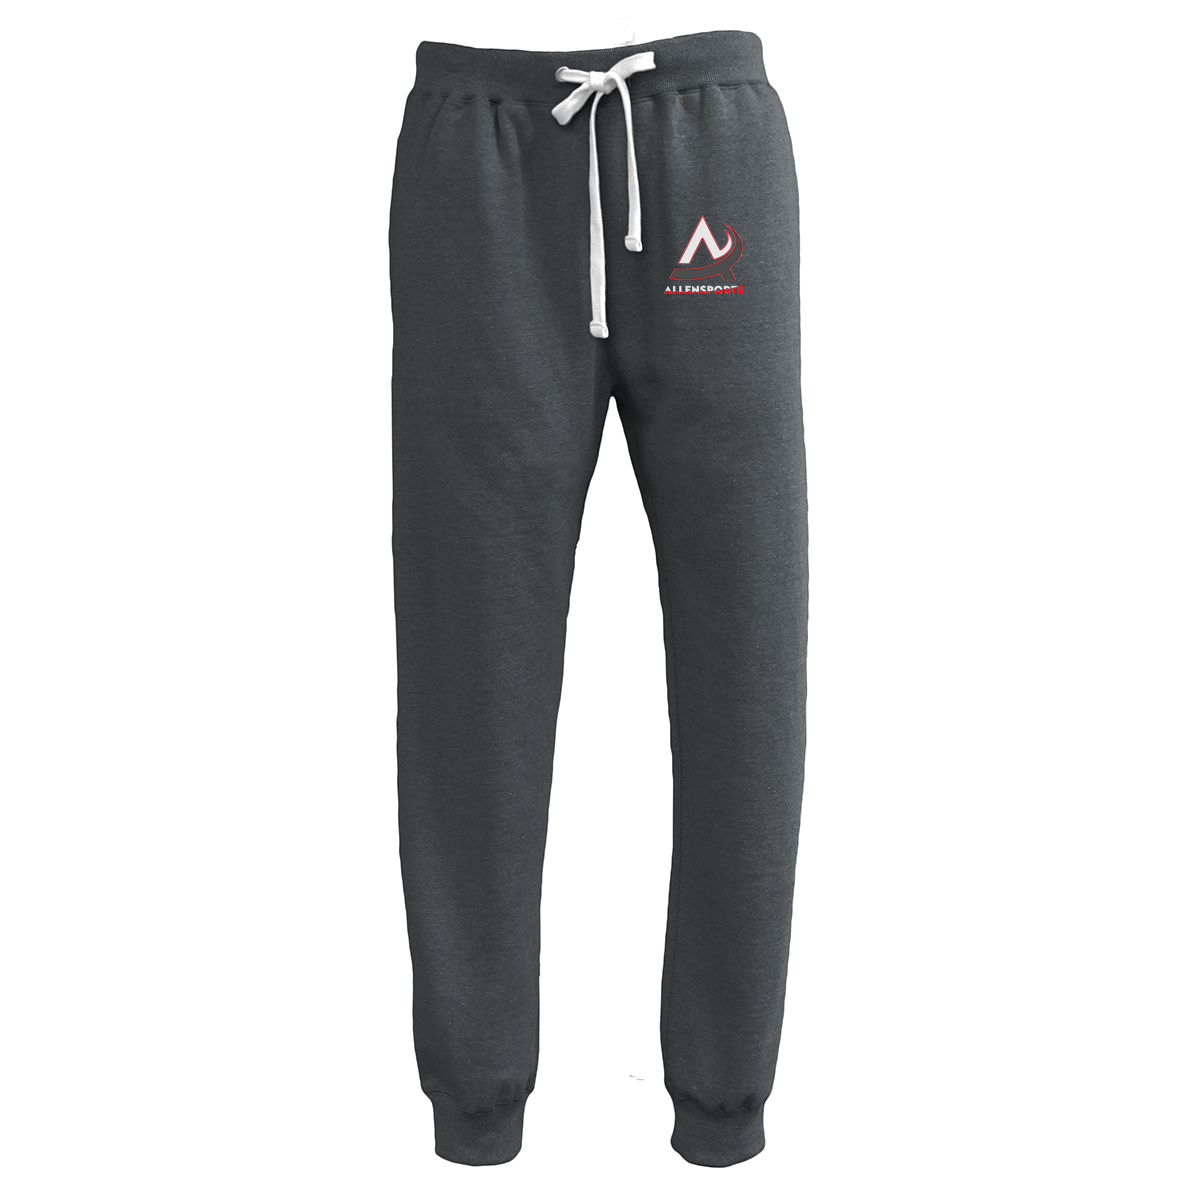 AllenSports Joggers